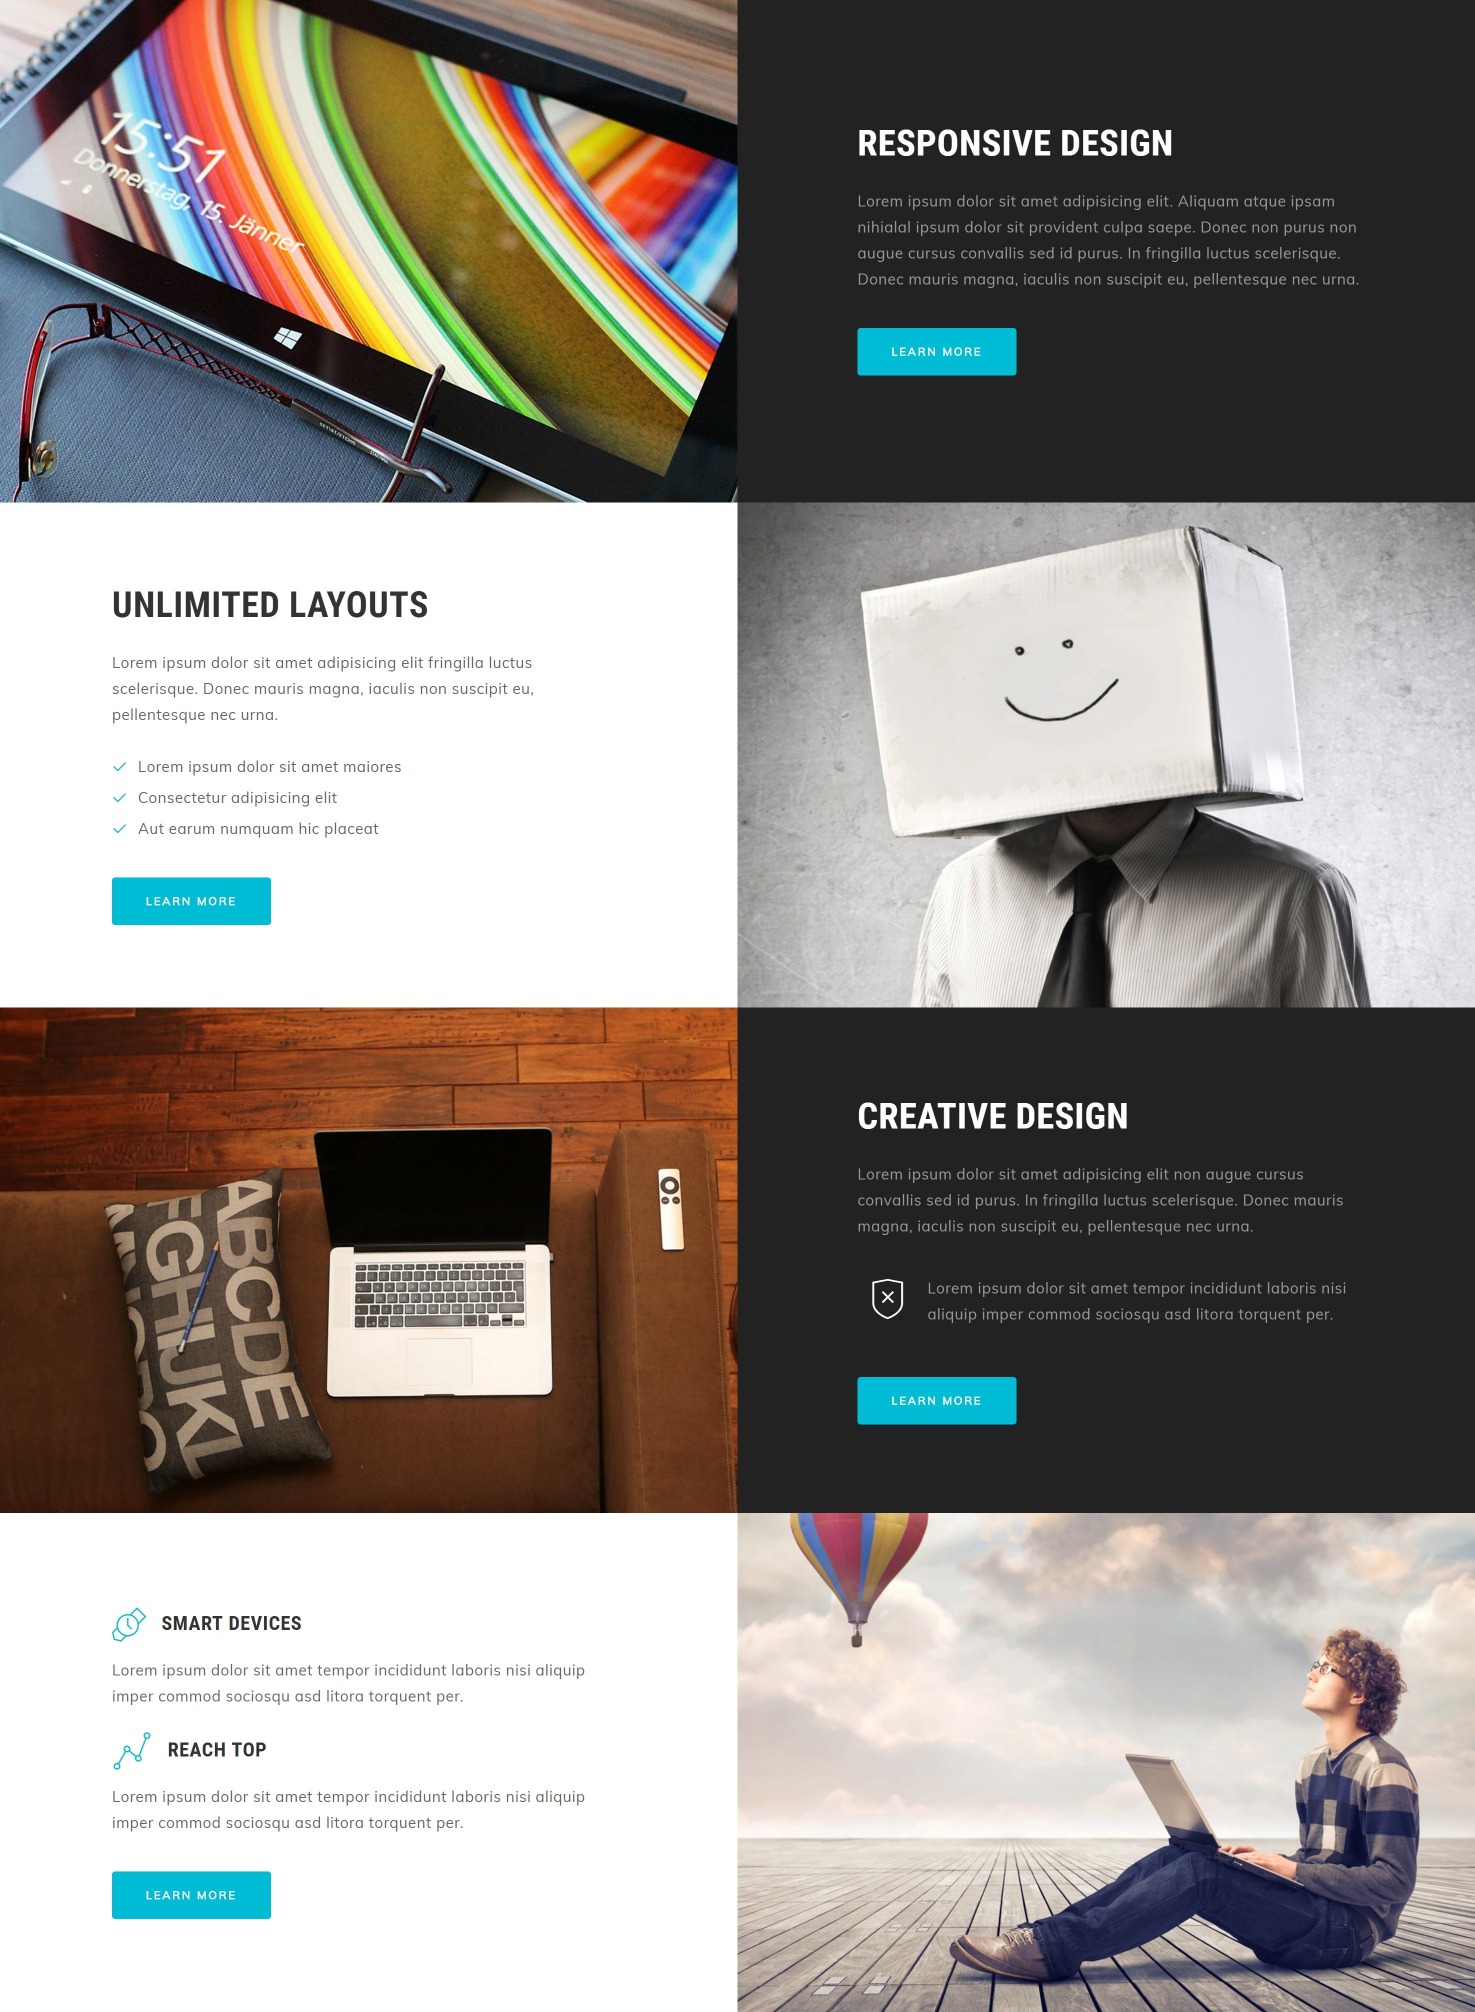 Solo - 103+ Pages HTML Bootstrap Template - 22